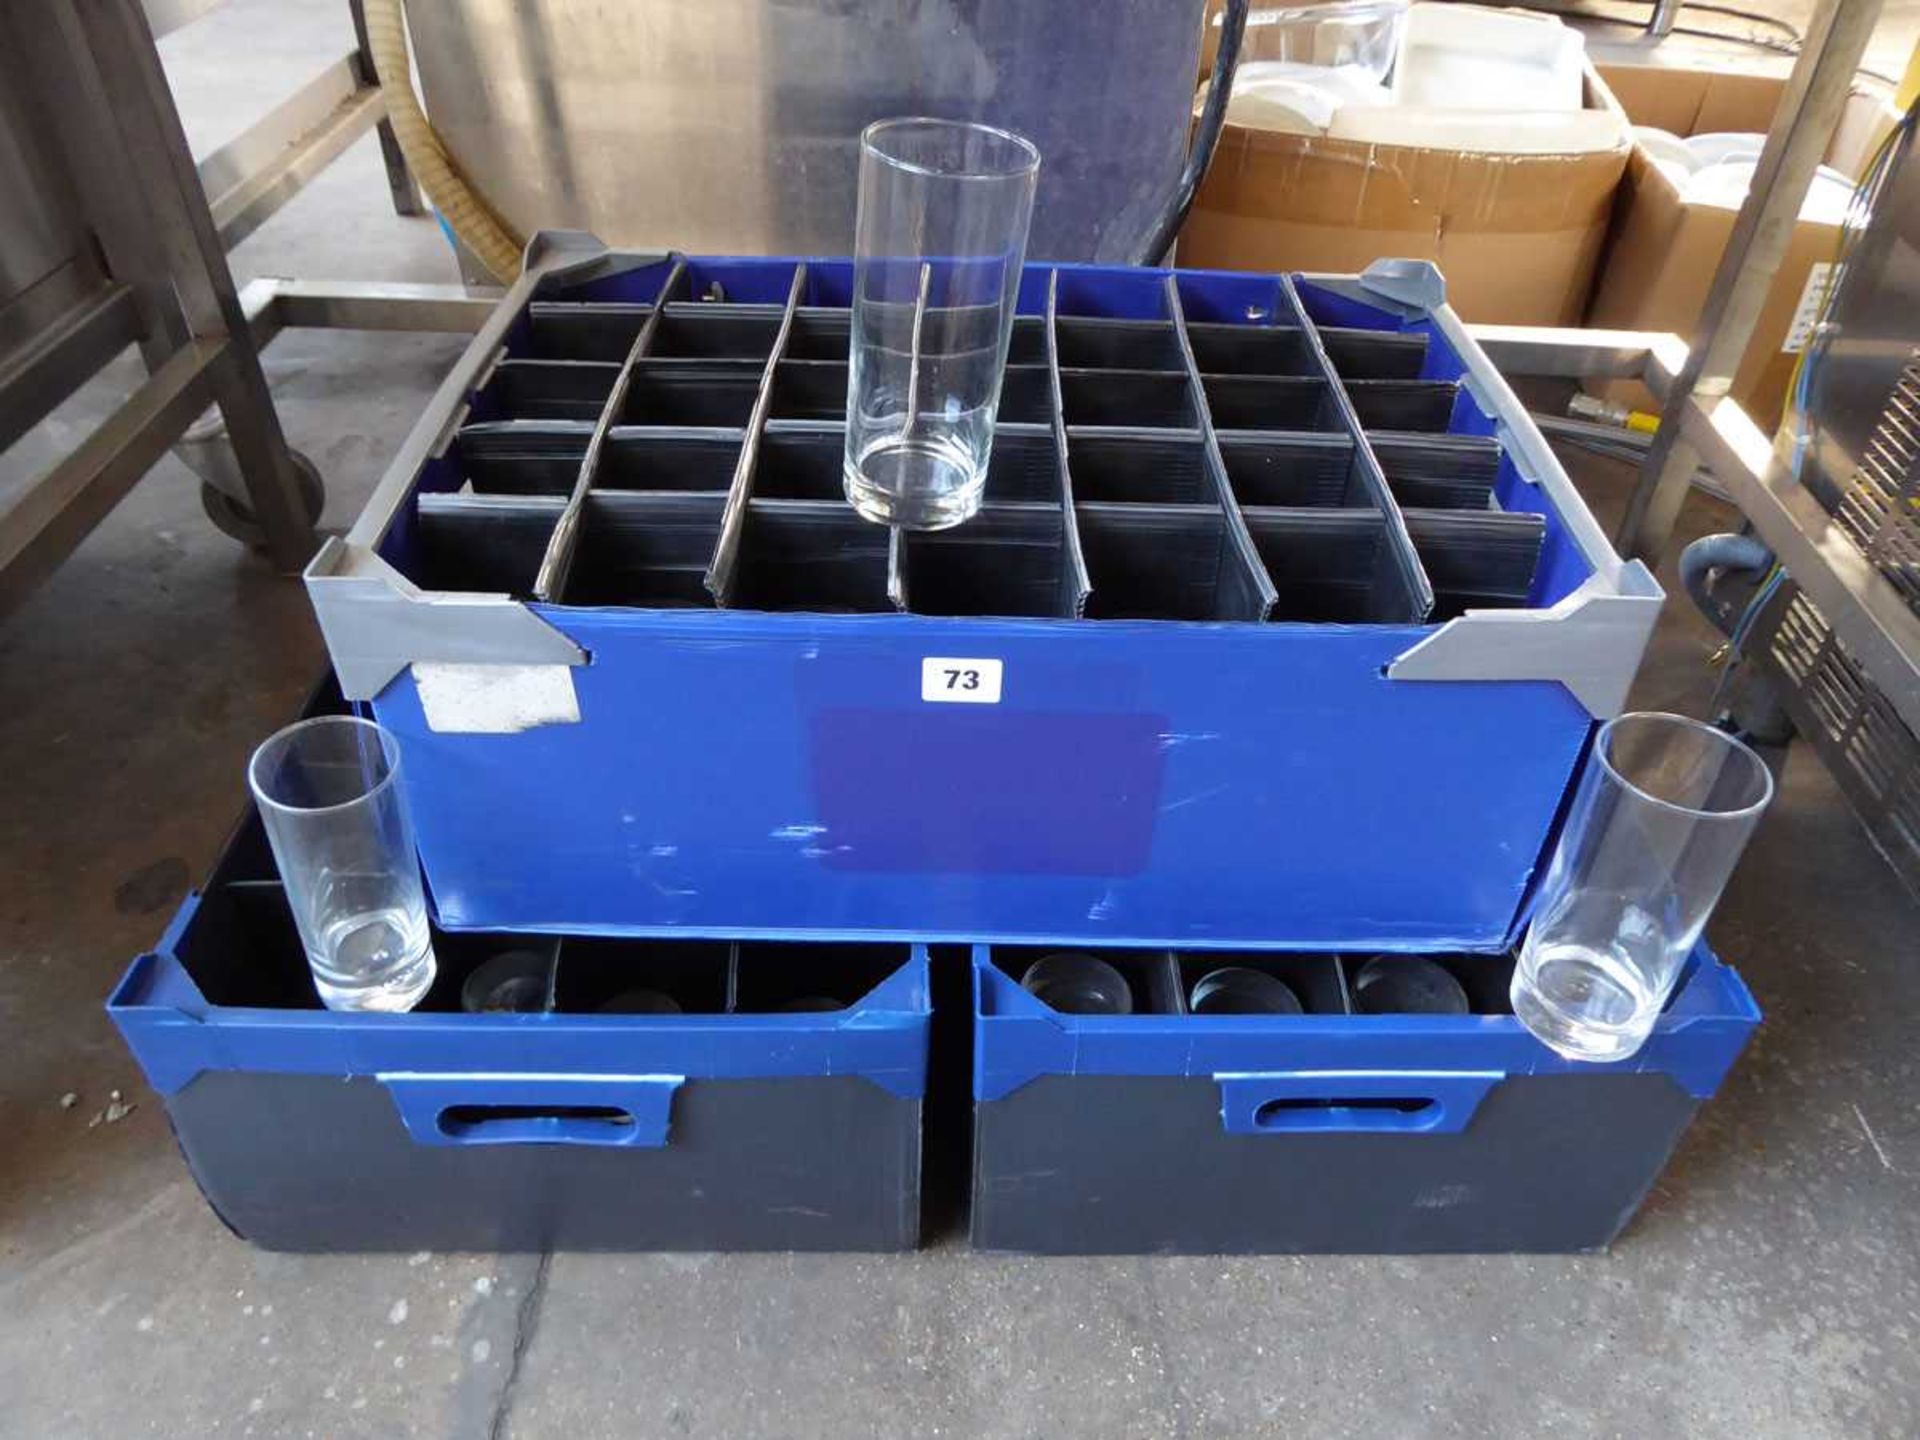 3 plastic stacking crates containing a large qty of high ball glasses